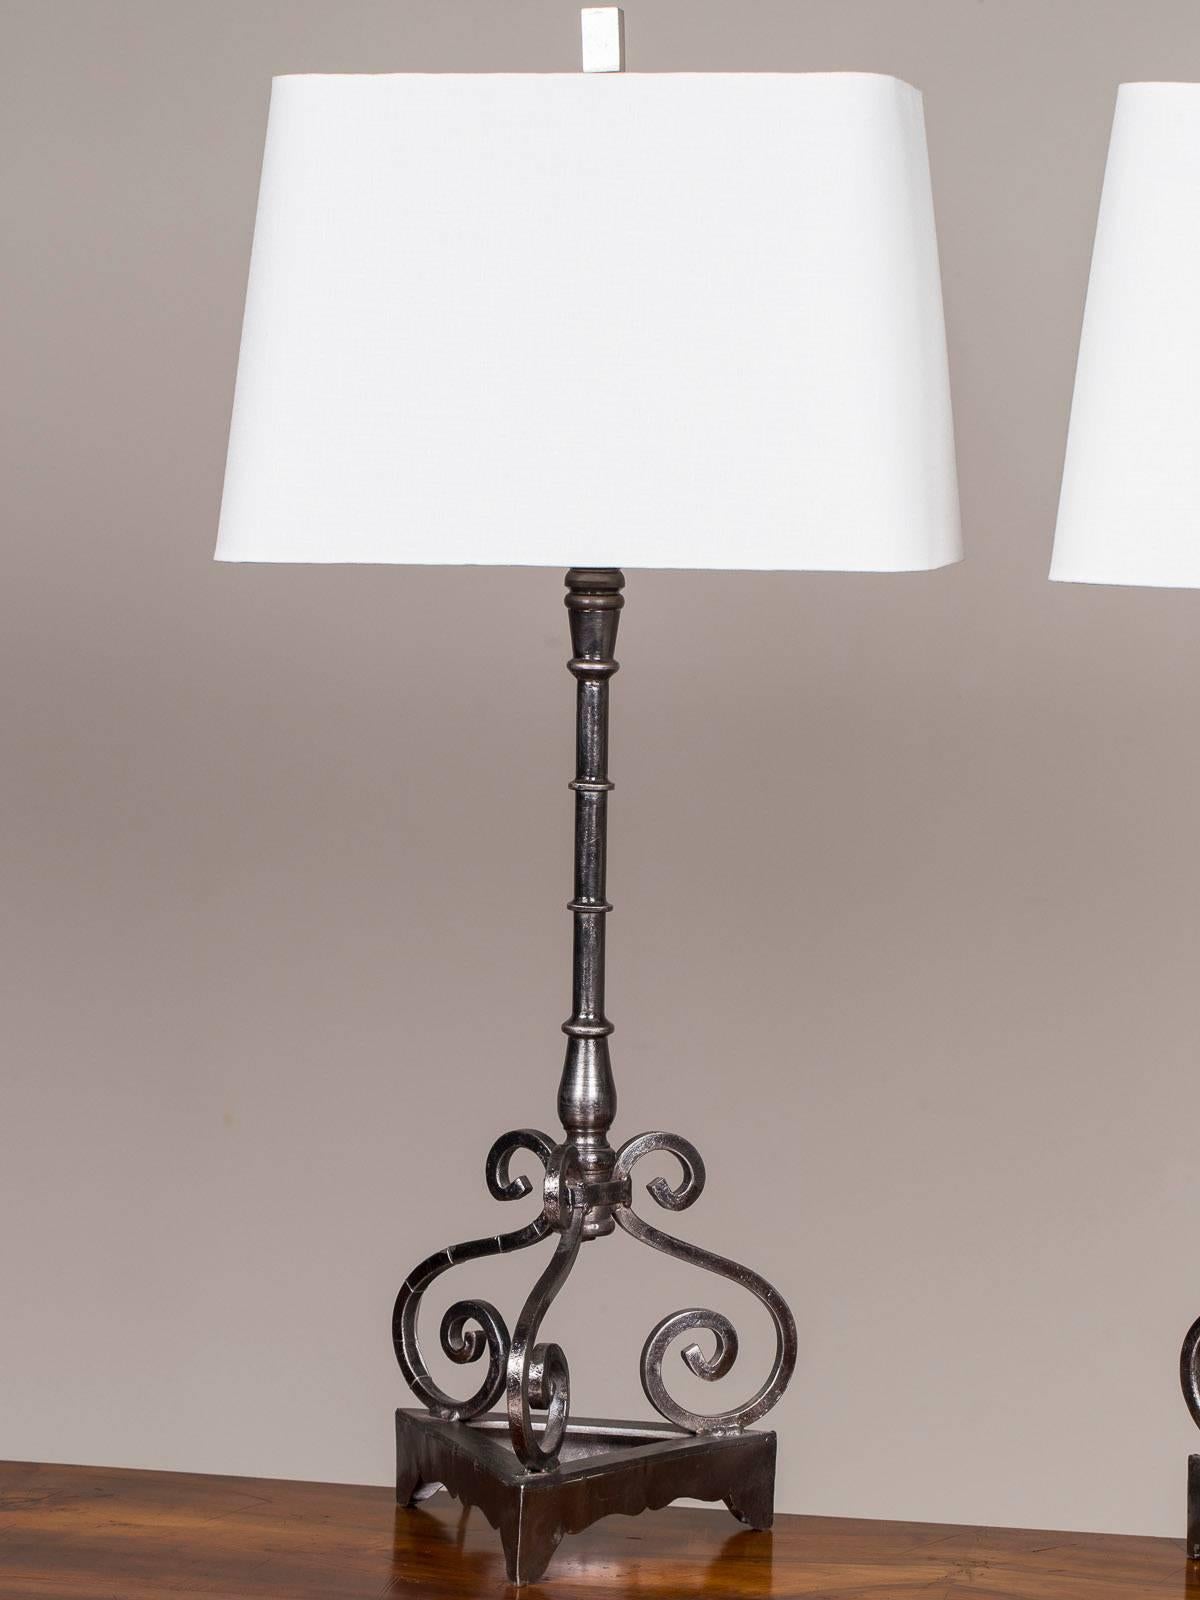 A pair of neoclassical style steel and iron modern lamps found in France. Please notice the interesting triangular base that supports three scrolled elements topped with a baluster form column. The metal possesses an intriguing finish of lights and